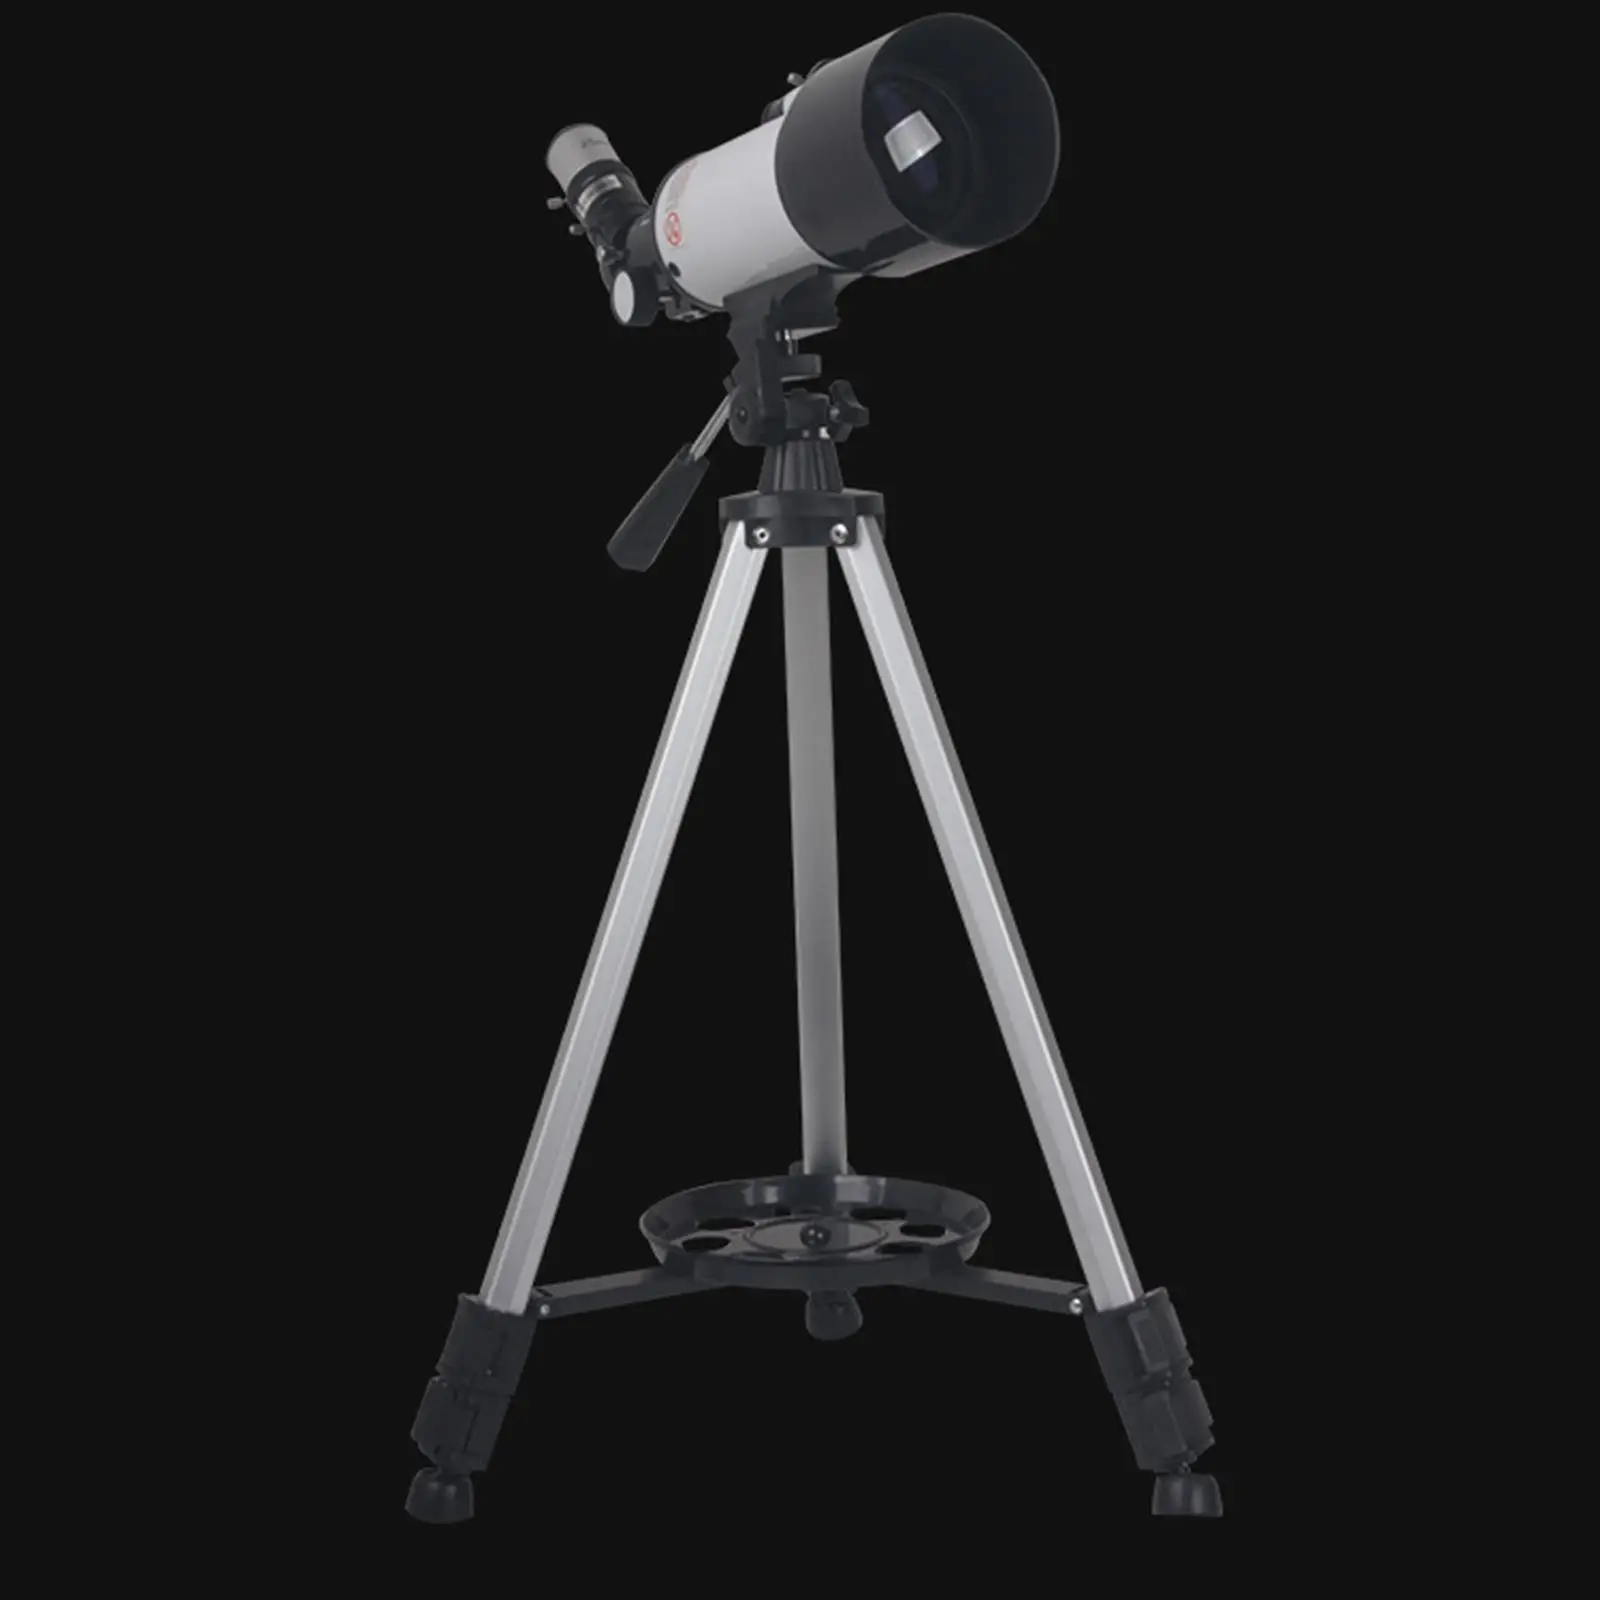 70mm Aperture 400mm Focal Length Telescope with Tripod for Beginners ,to Observe Celestial Objects AT Night Accessory Durable